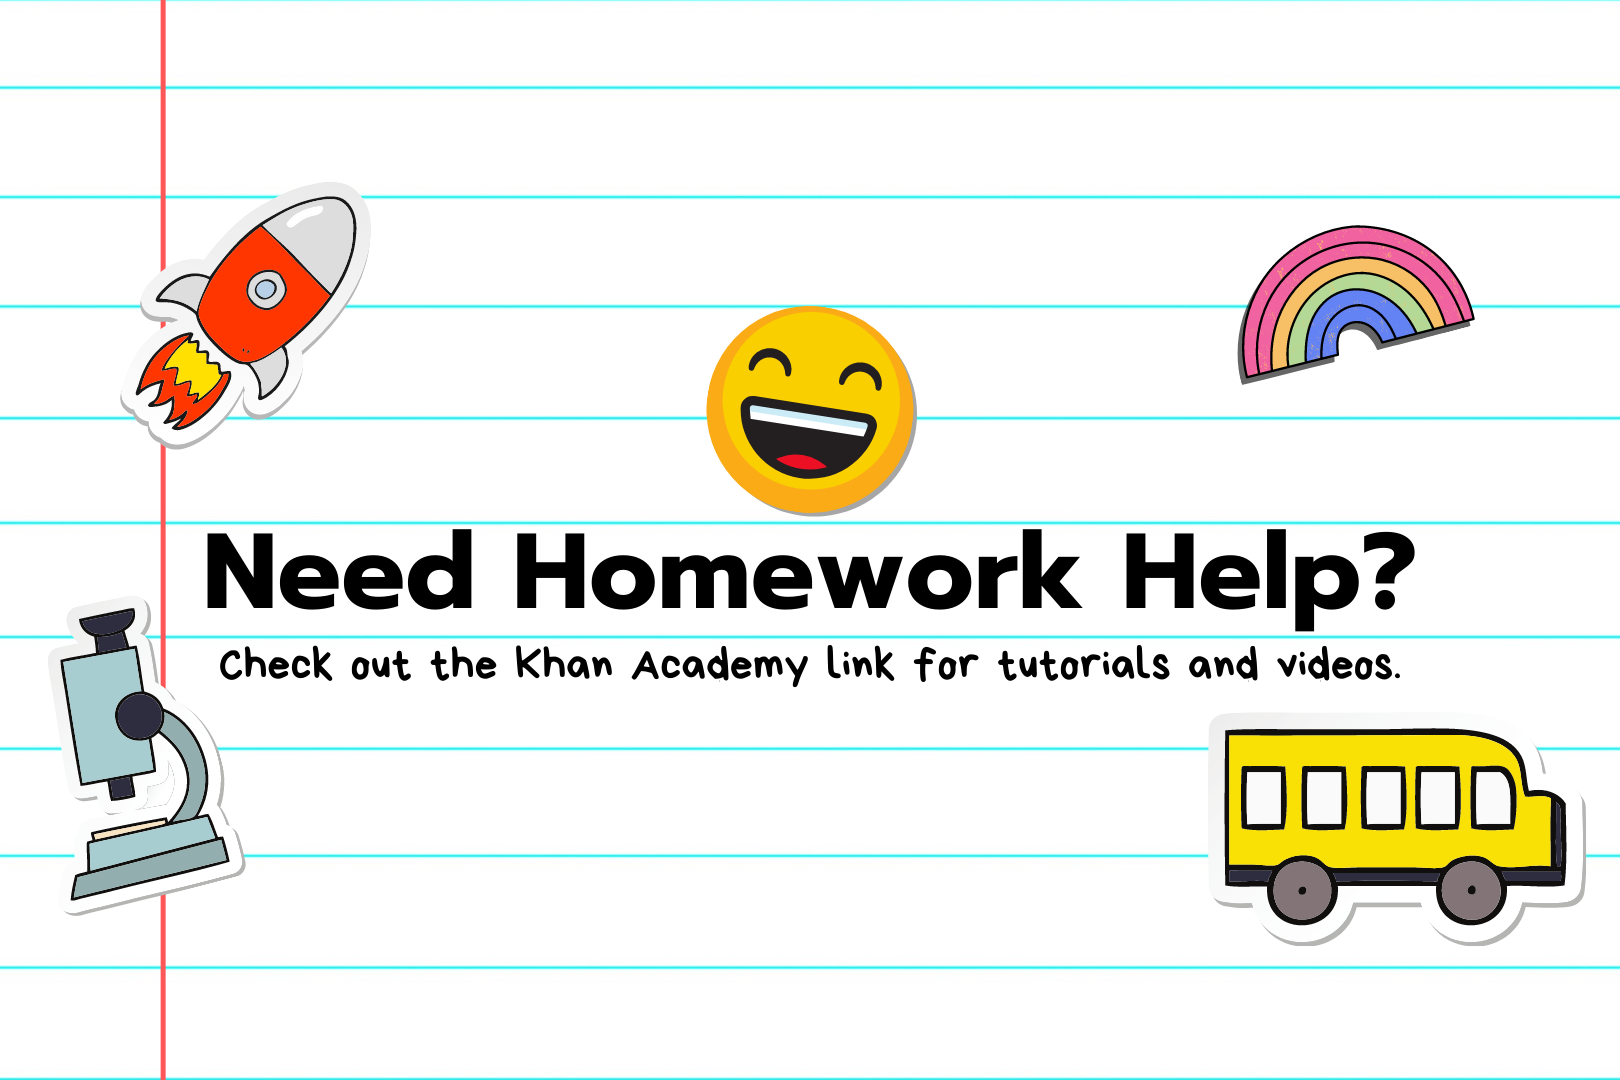 Homework help - Check out the Khan Academy link for tutorials and videos.